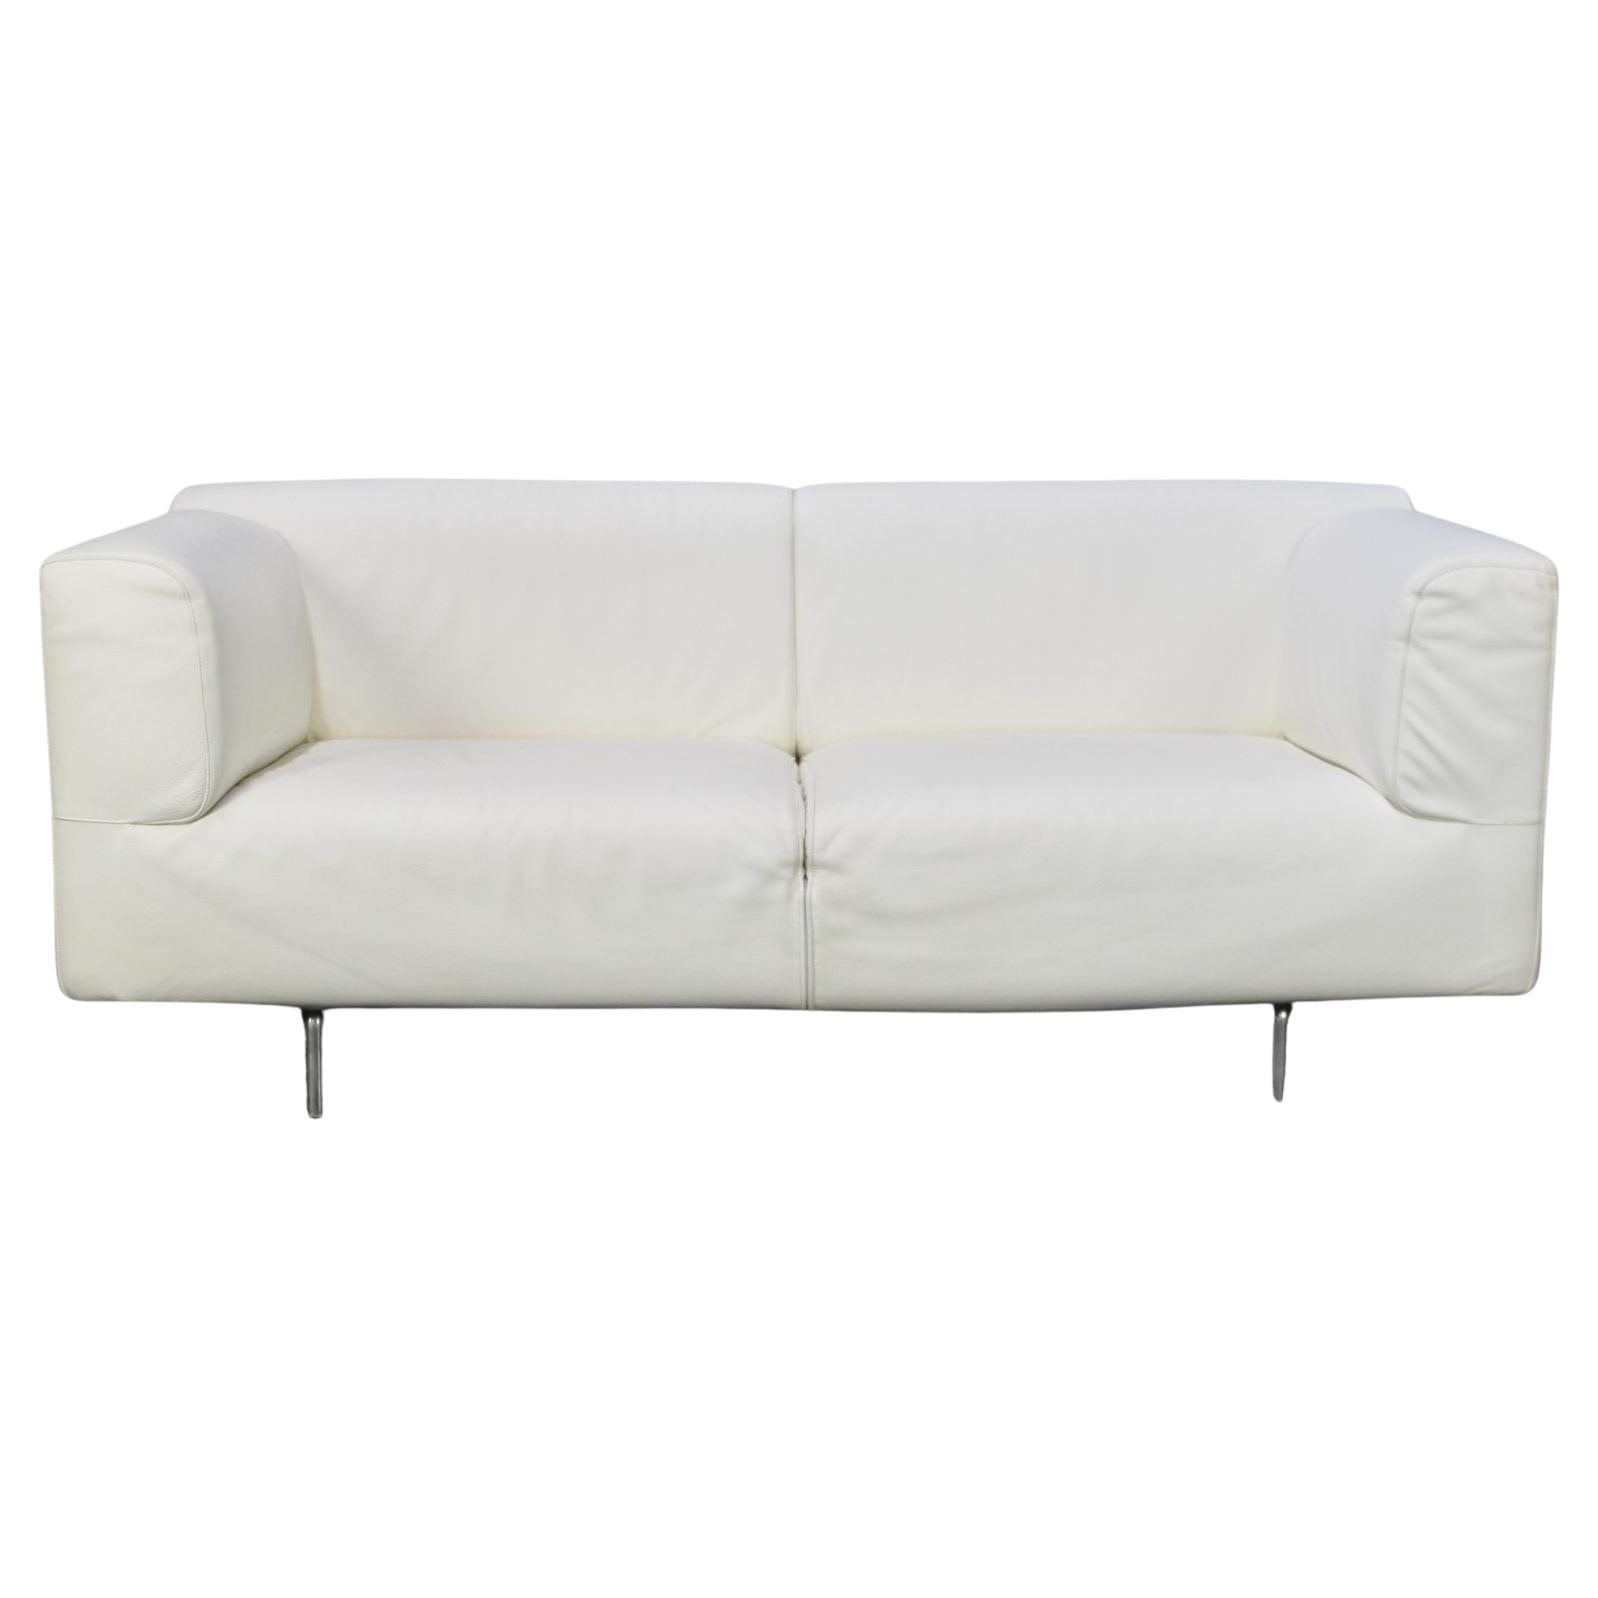 Cassina “250 Met” Large 2-Seat Sofa in Chalk White Leather For Sale